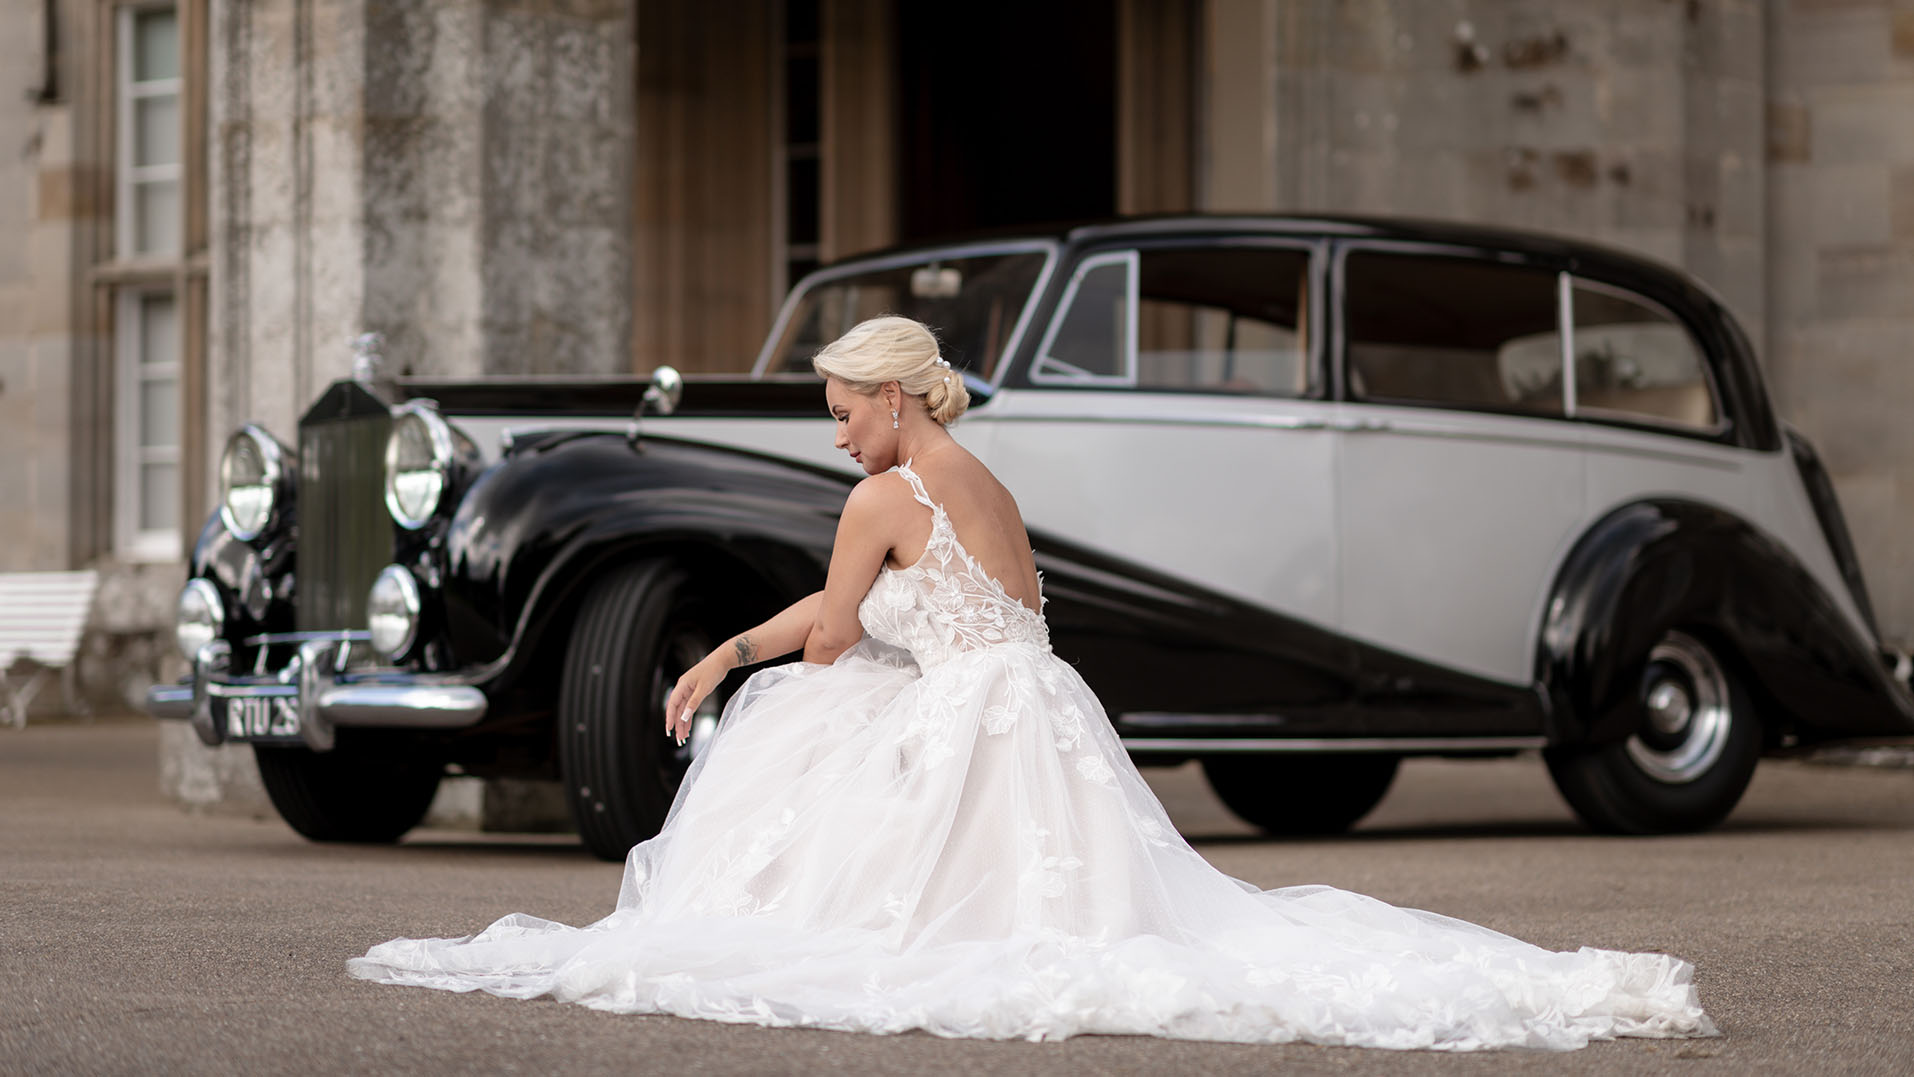 Bride wearing a large white dressed seating in front of a Classic Rolls-Royce Limousine